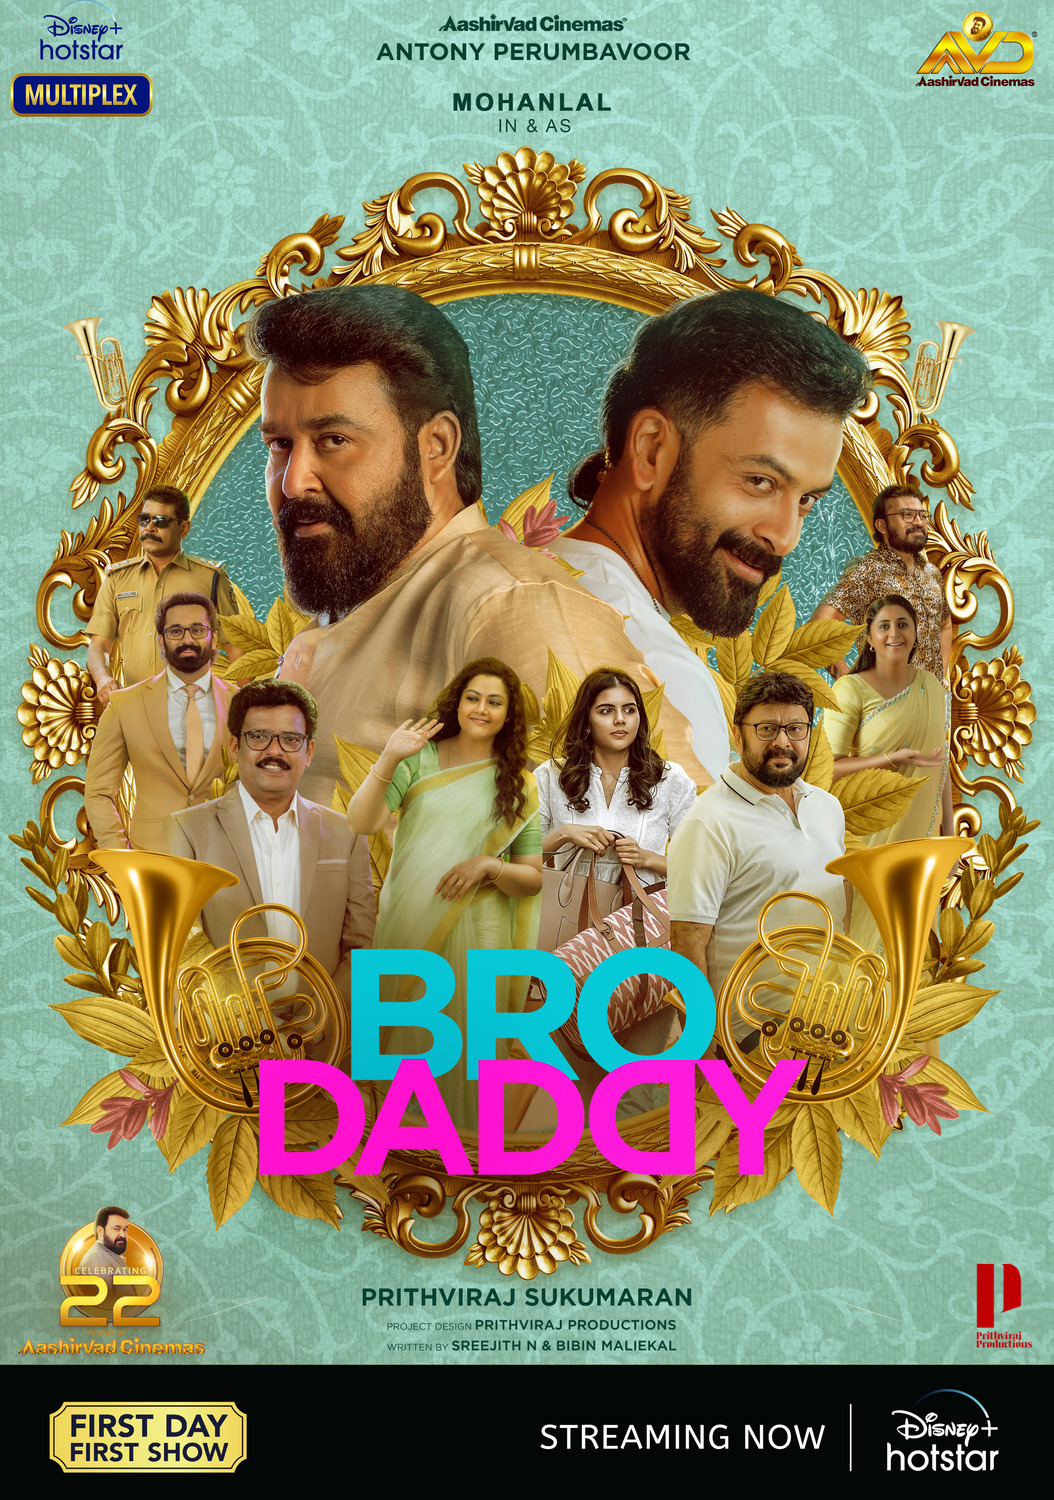 Extra Large Movie Poster Image for Bro Daddy (#4 of 4)